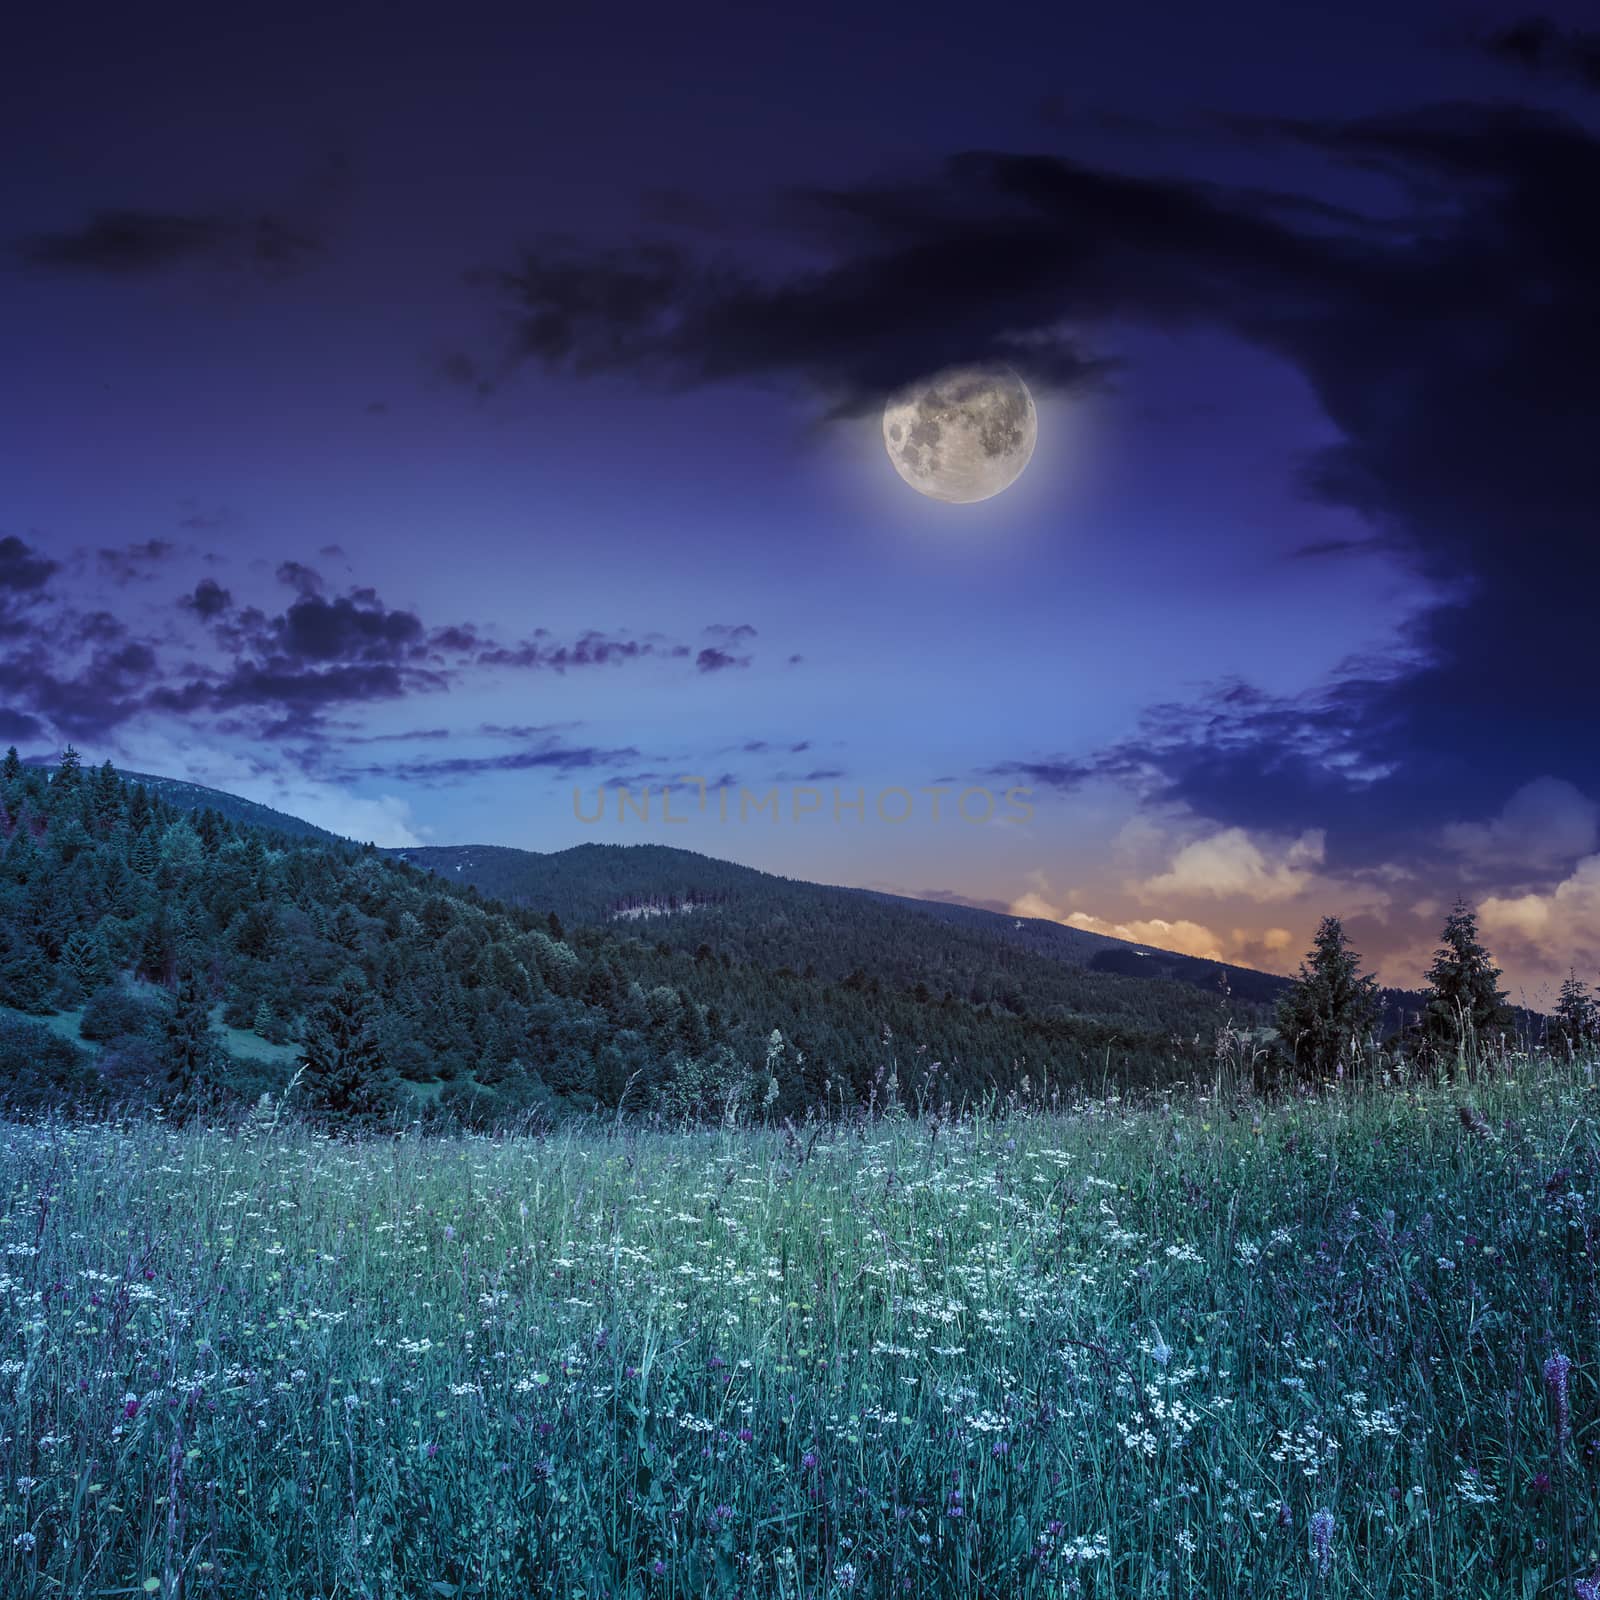 mountain summer landscape. pine trees near meadow and forest on hillside under night sky with clouds in moon light